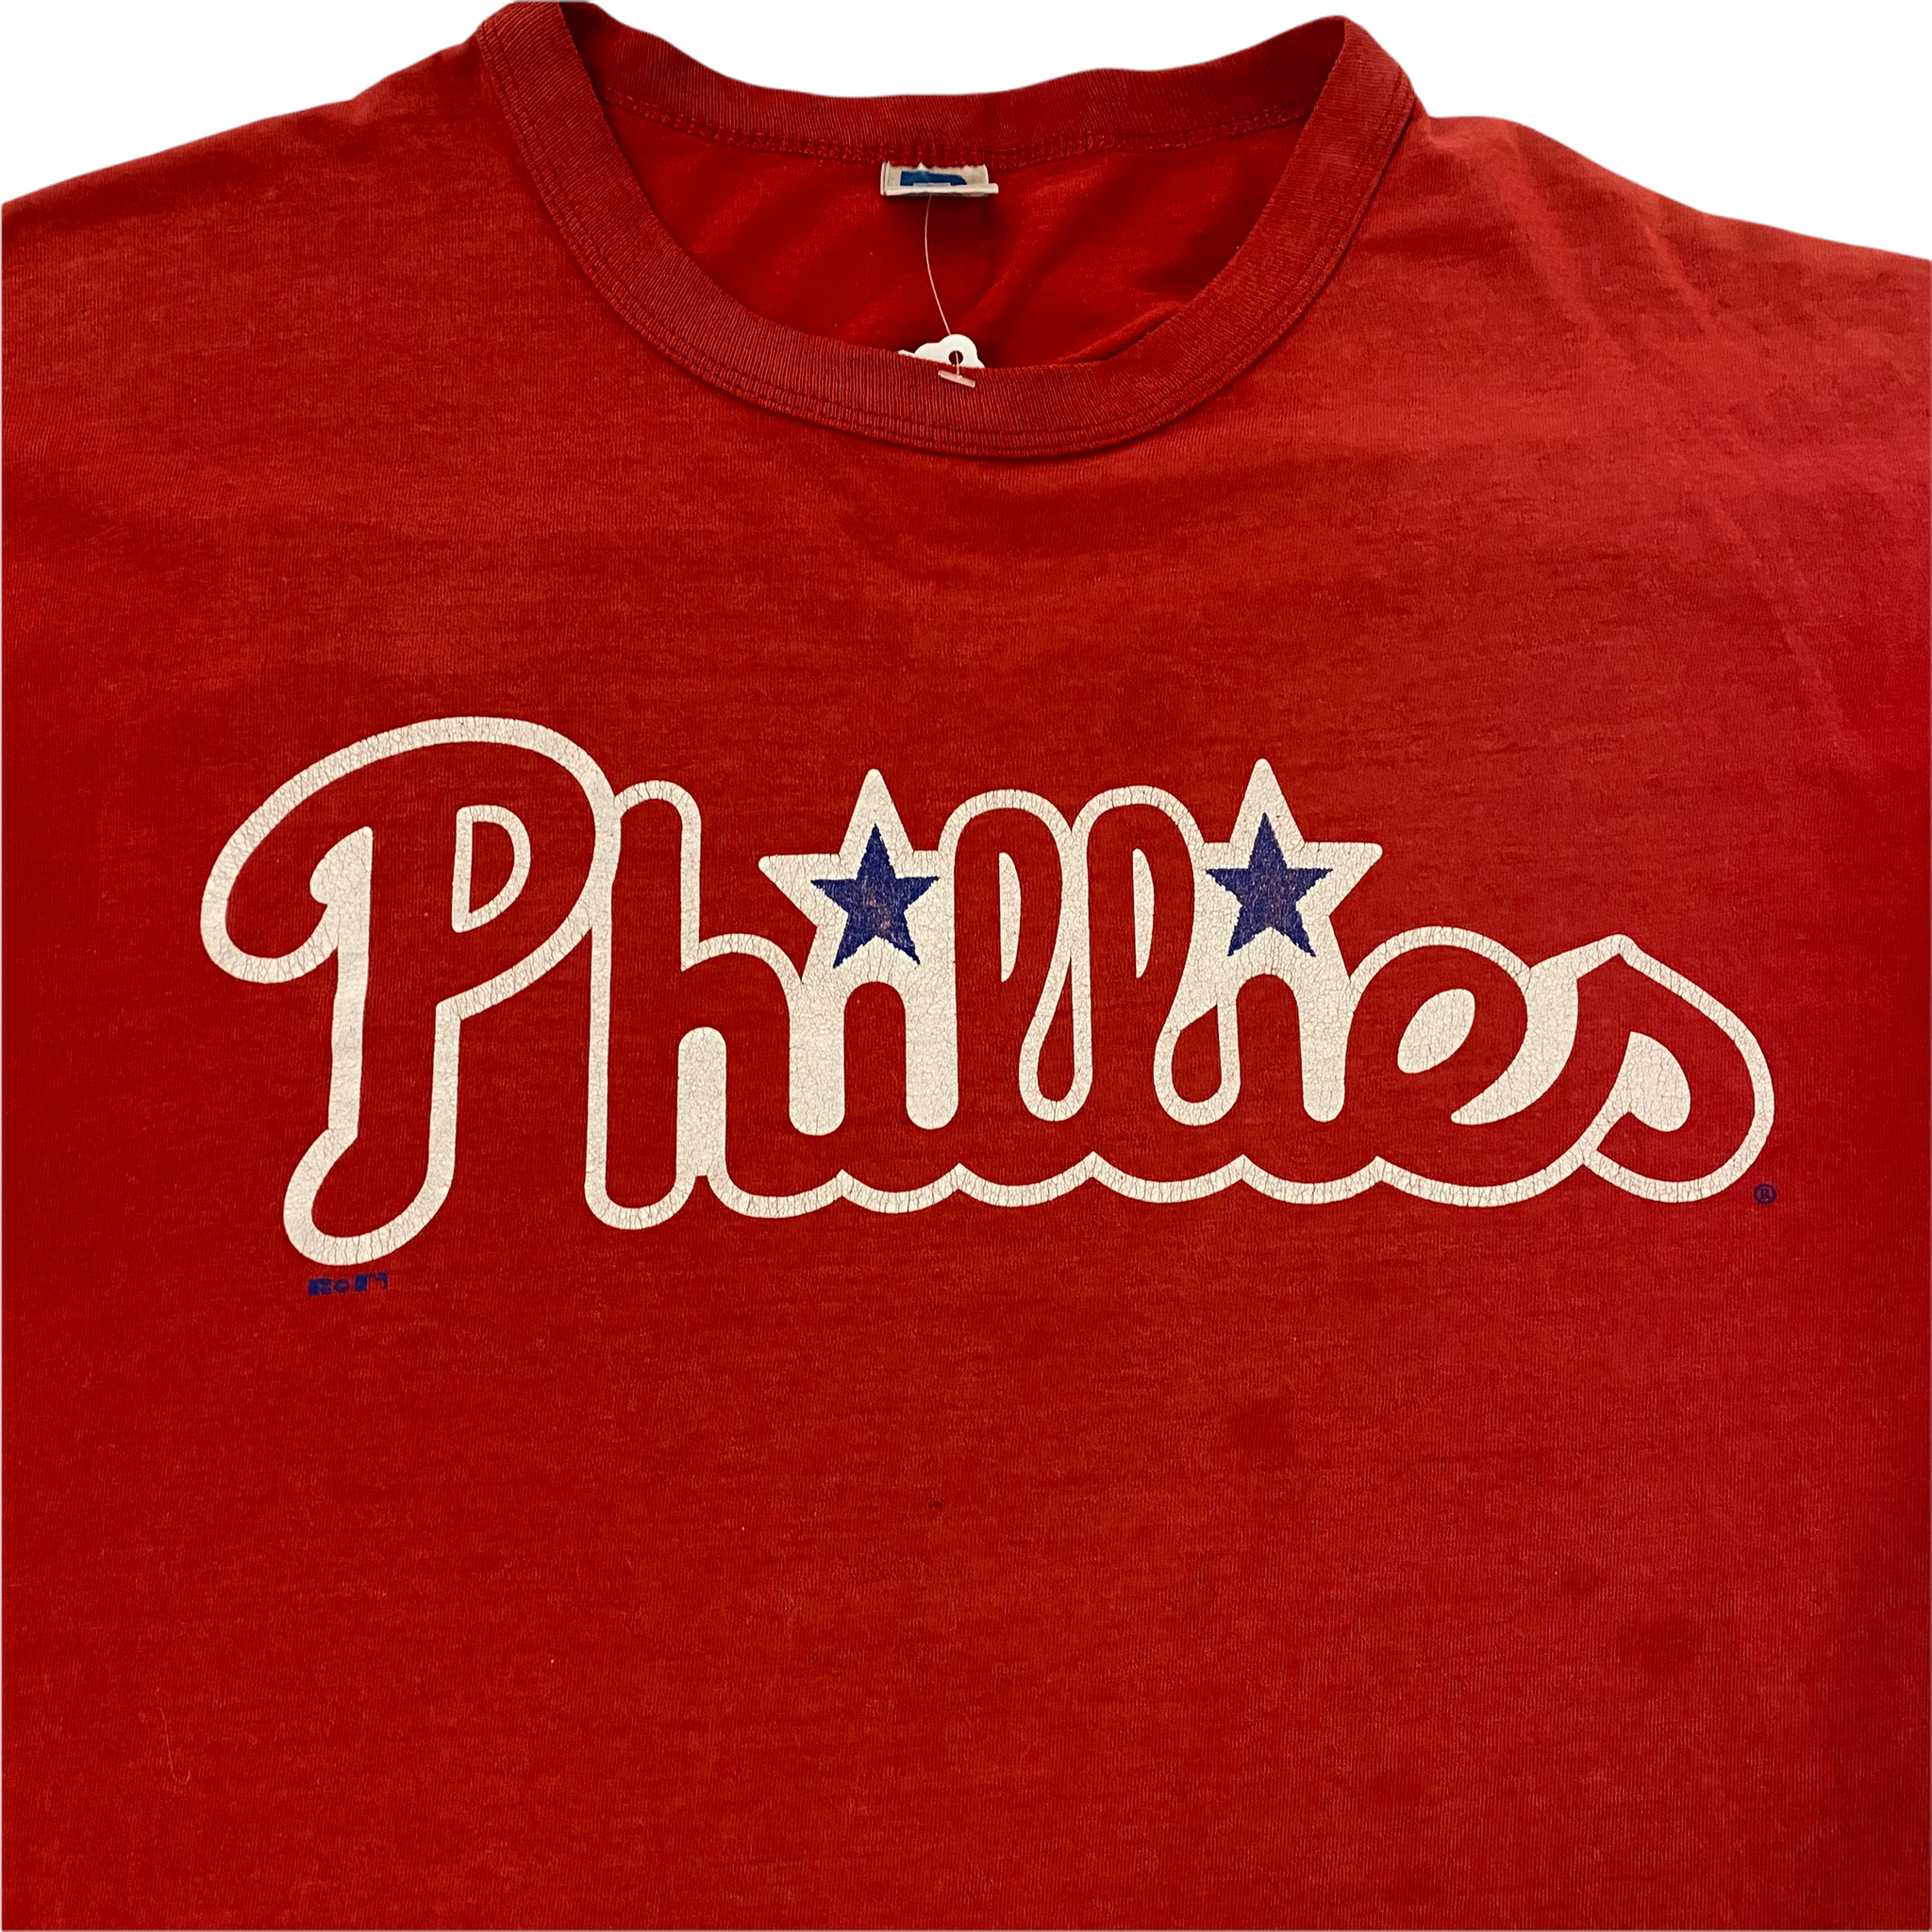 Phillies T-Shirts for Sale